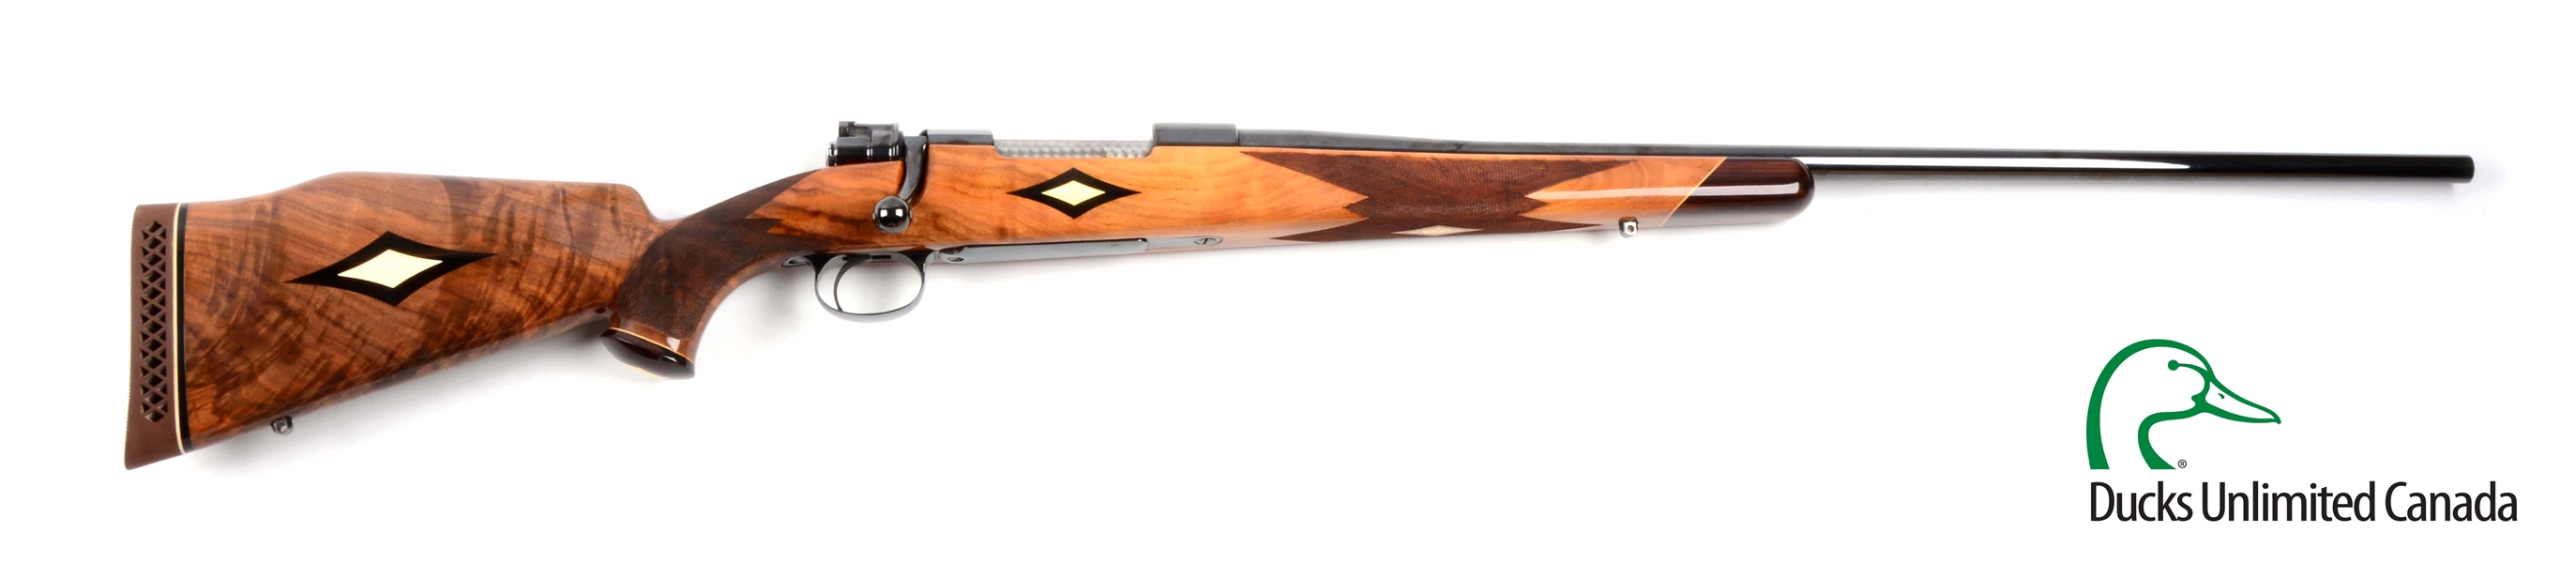 (C) EXTREMELY EARLY FN MAUSER WEATHERBY CUSTOM BOLT ACTION RIFLE.